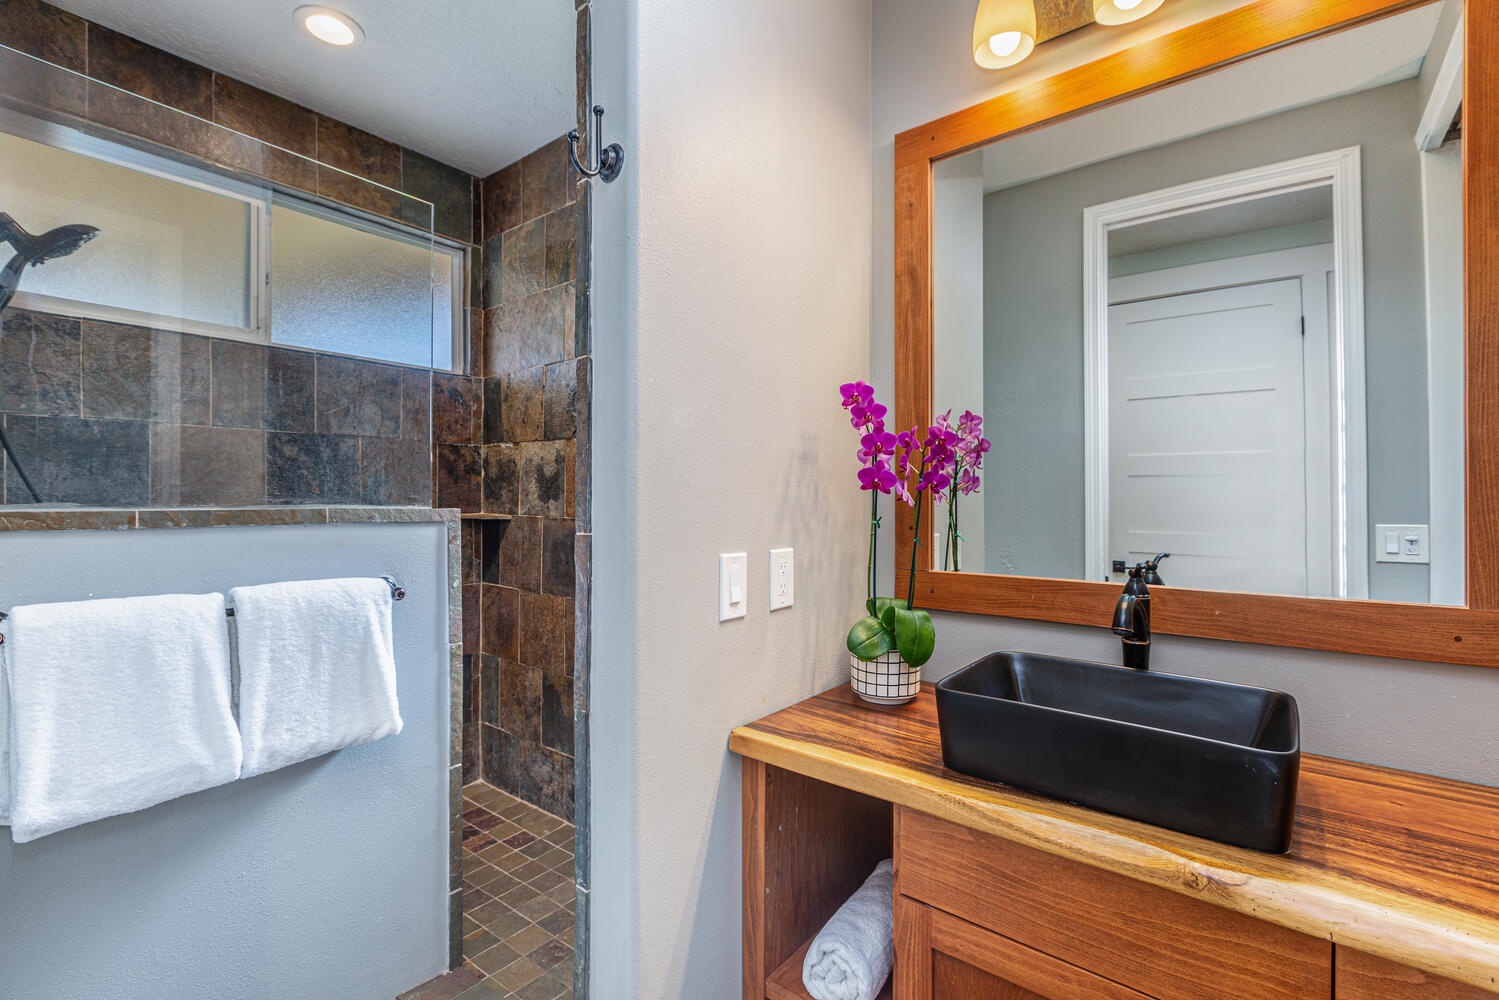 Princeville Vacation Rentals, Pohaku Villa - The downstair shared bathroom has single vanity and separate shower.